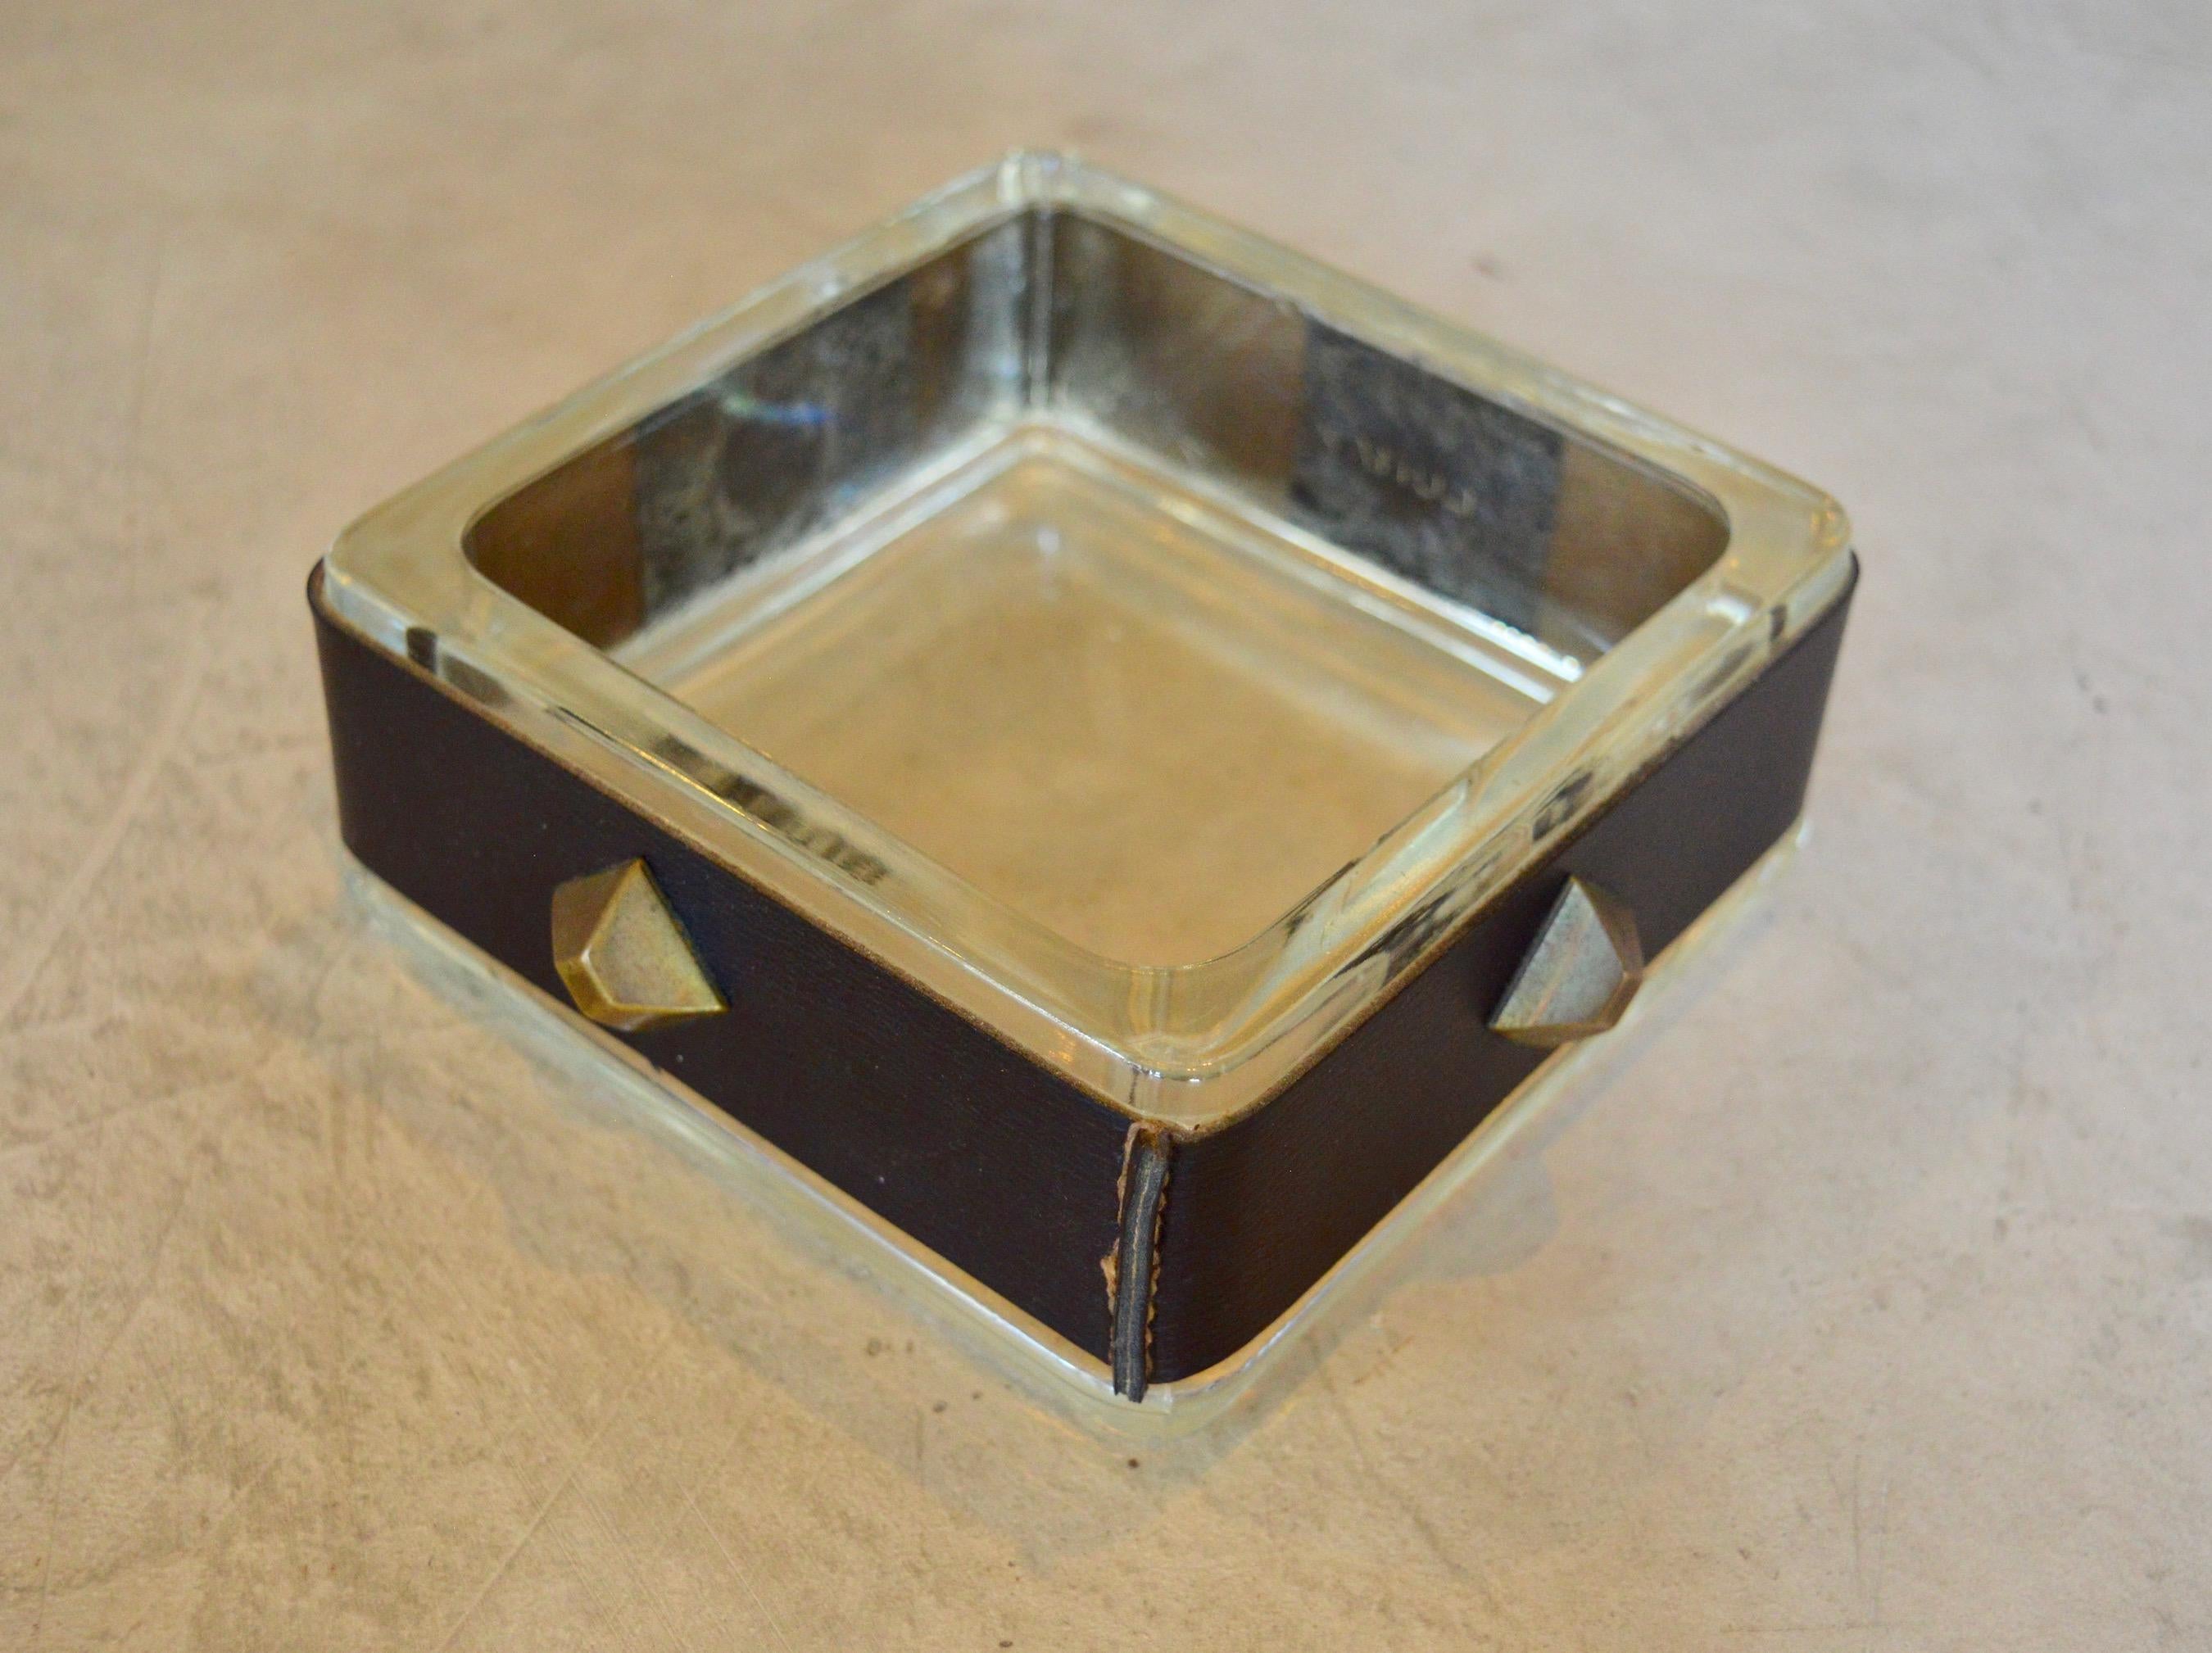 Handsome black leather and glass ashtray / catchall by French designer Jacques Adnet. Signature Adnet contrast stitching throughout. Brass stud details on all sides. Great desktop piece or catchall to put by the front door. Very good vintage